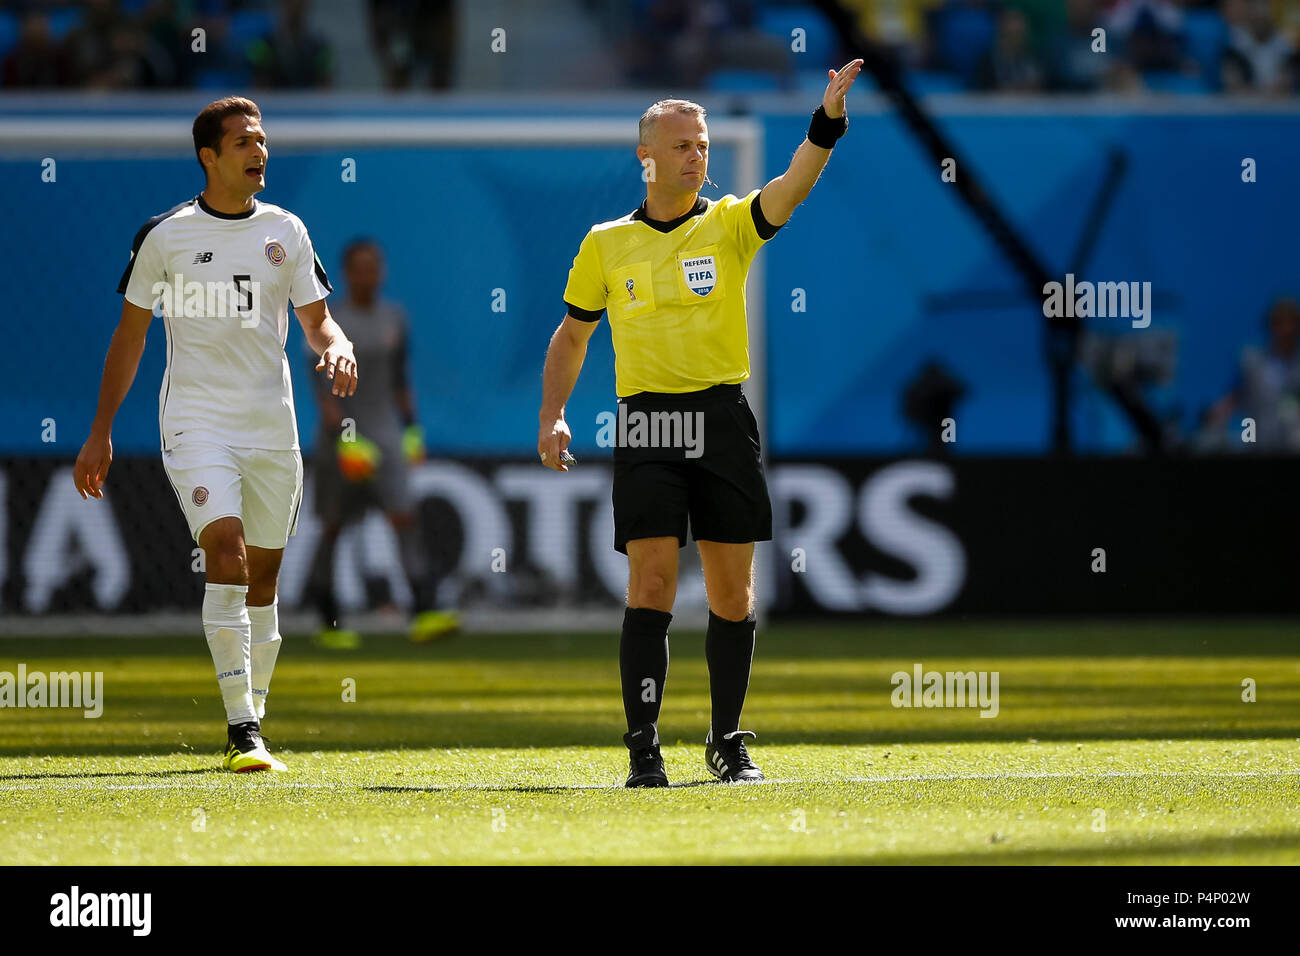 Saint Petersburg, Russia. 22nd June 2018. Referee Bjorn Kuipers during the 2018 FIFA World Cup Group E match between Brazil and Costa Rica at Saint Petersburg Stadium on June 22nd 2018 in Saint Petersburg, Russia. (Photo by Daniel Chesterton/phcimages.com) Credit: PHC Images/Alamy Live News Stock Photo